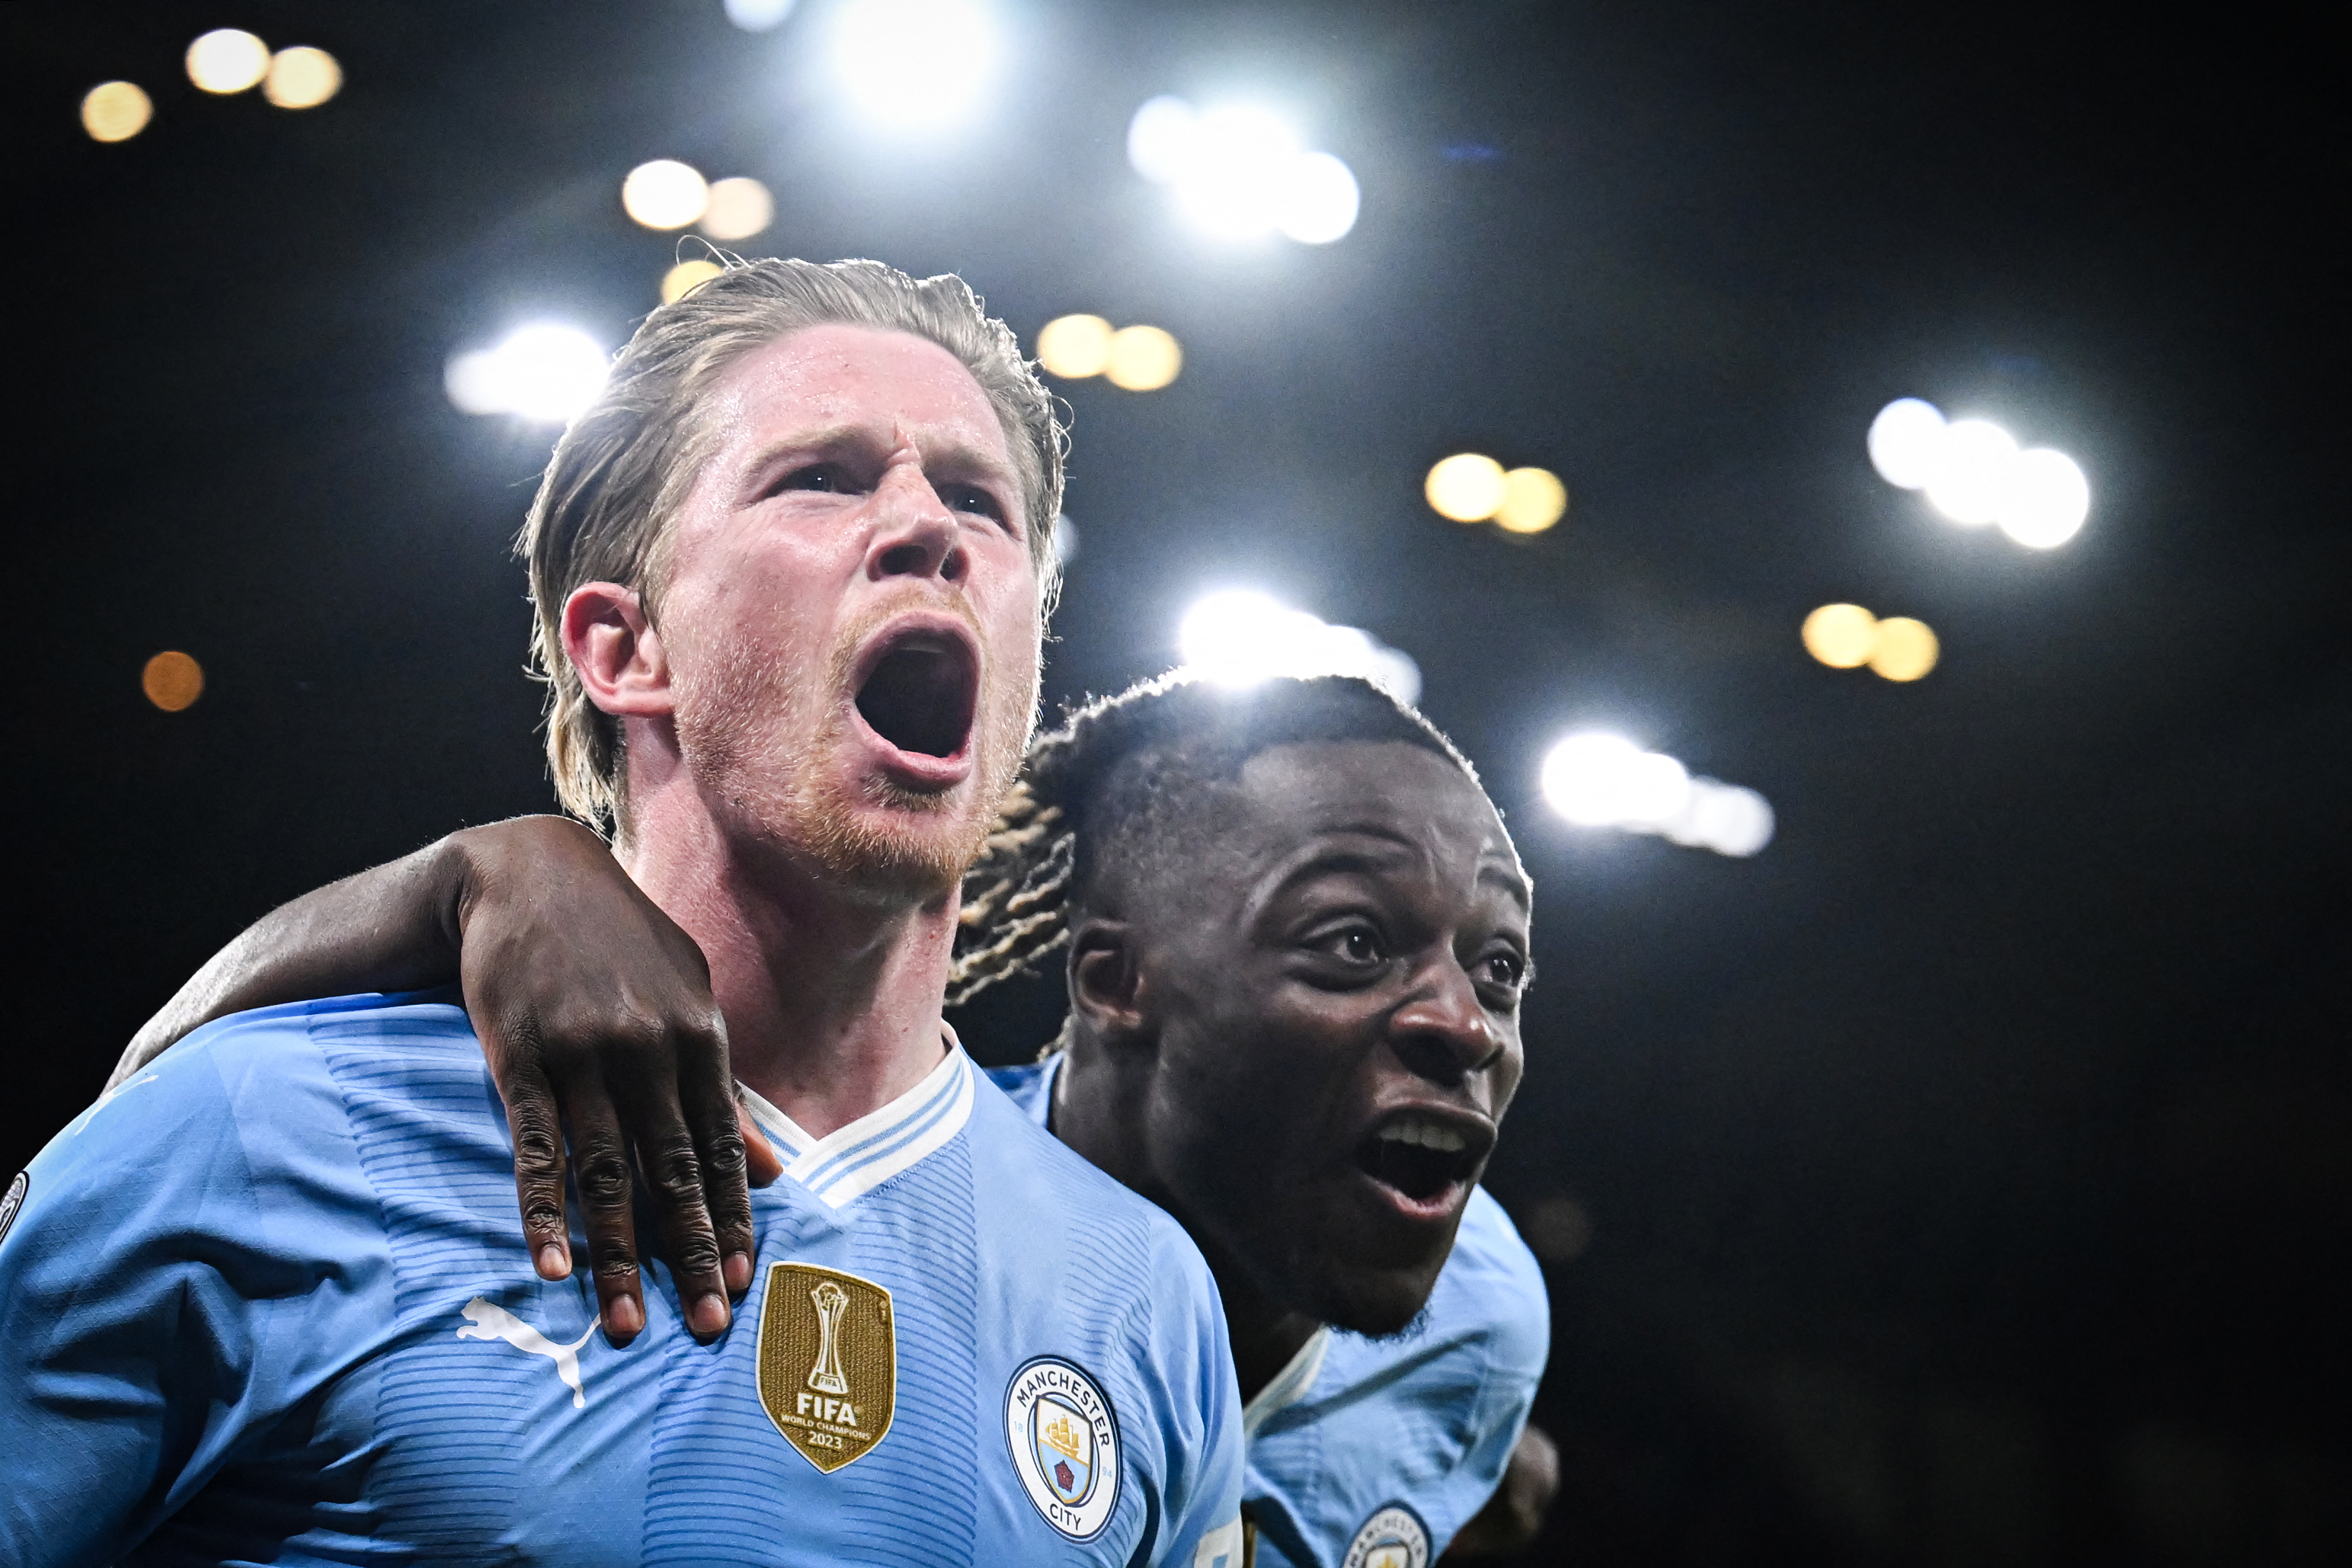 De Bruyne scored against Real Madrid but could not finish the match